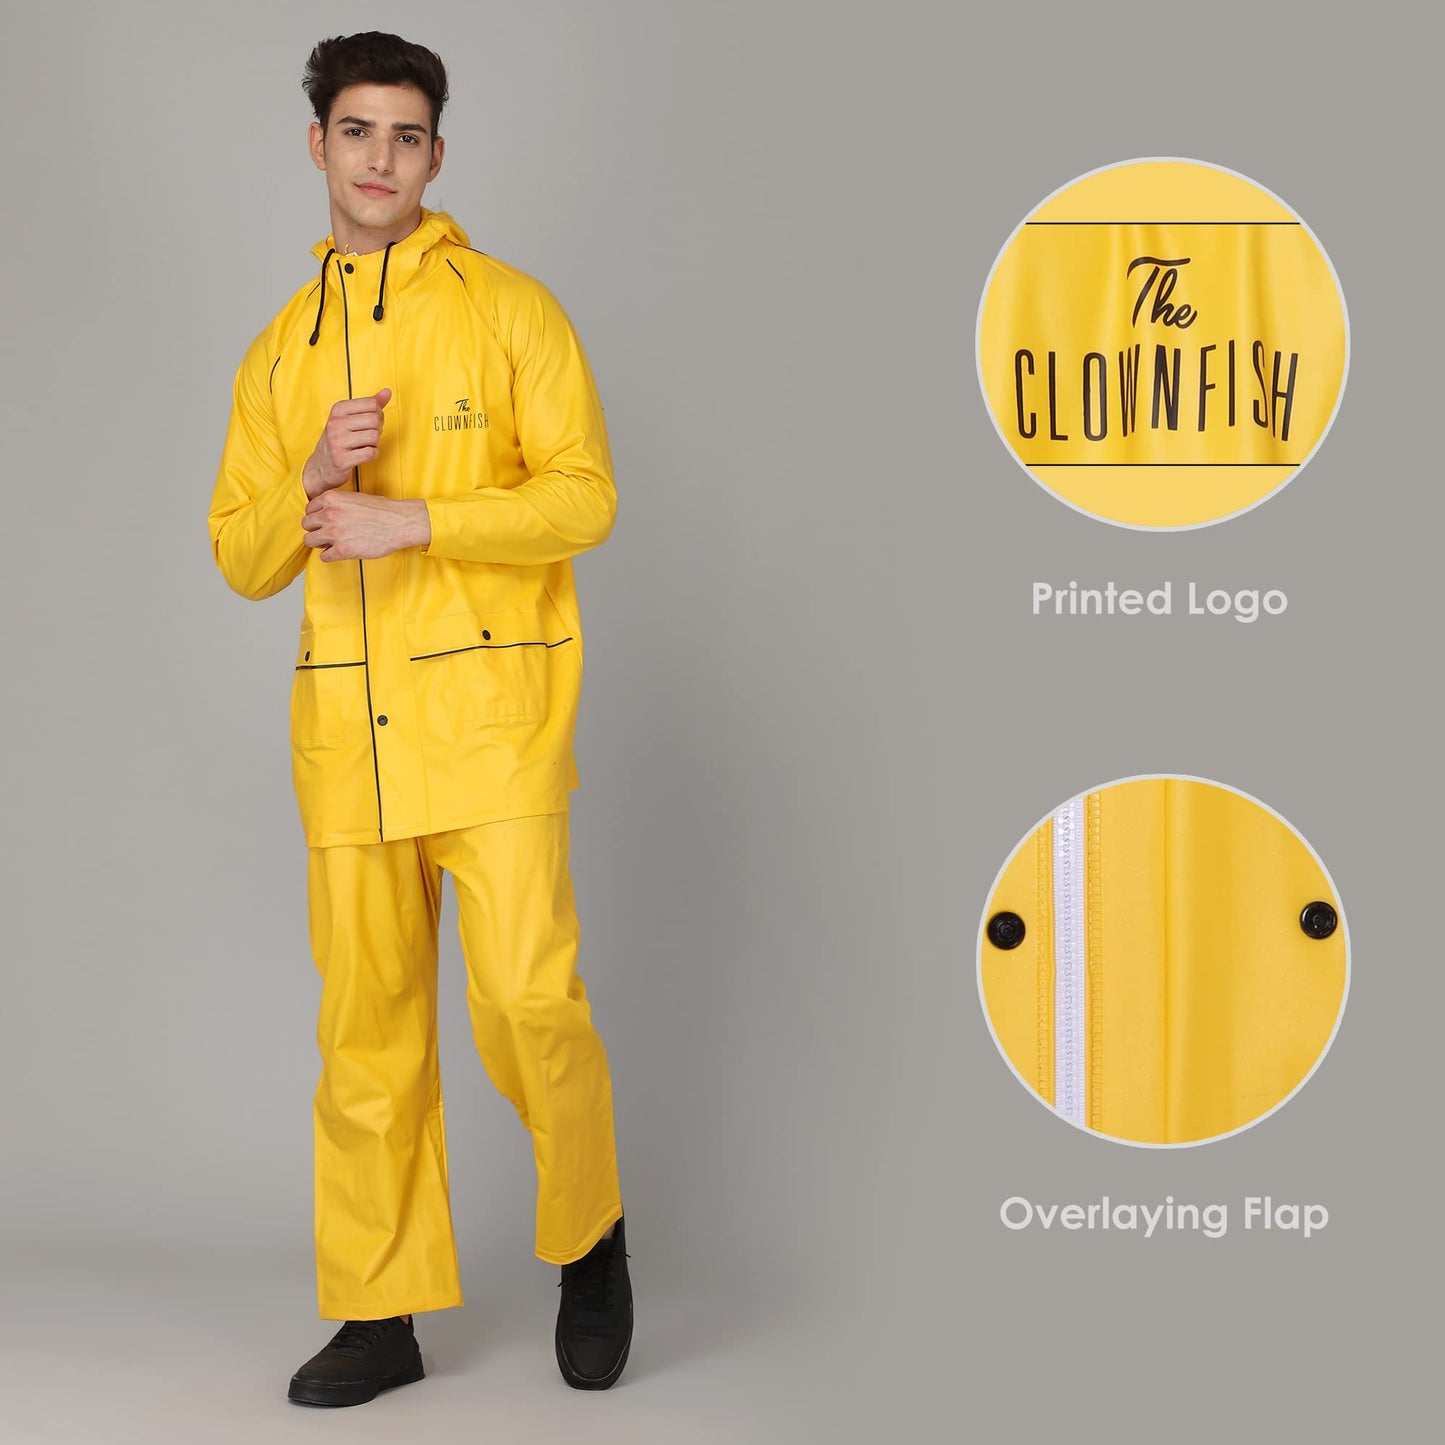 THE CLOWNFISH Azure Series Men's PVC Solid Waterproof Rain coat with Hood Set of Top and Bottom (Sea Green, XX-Large)